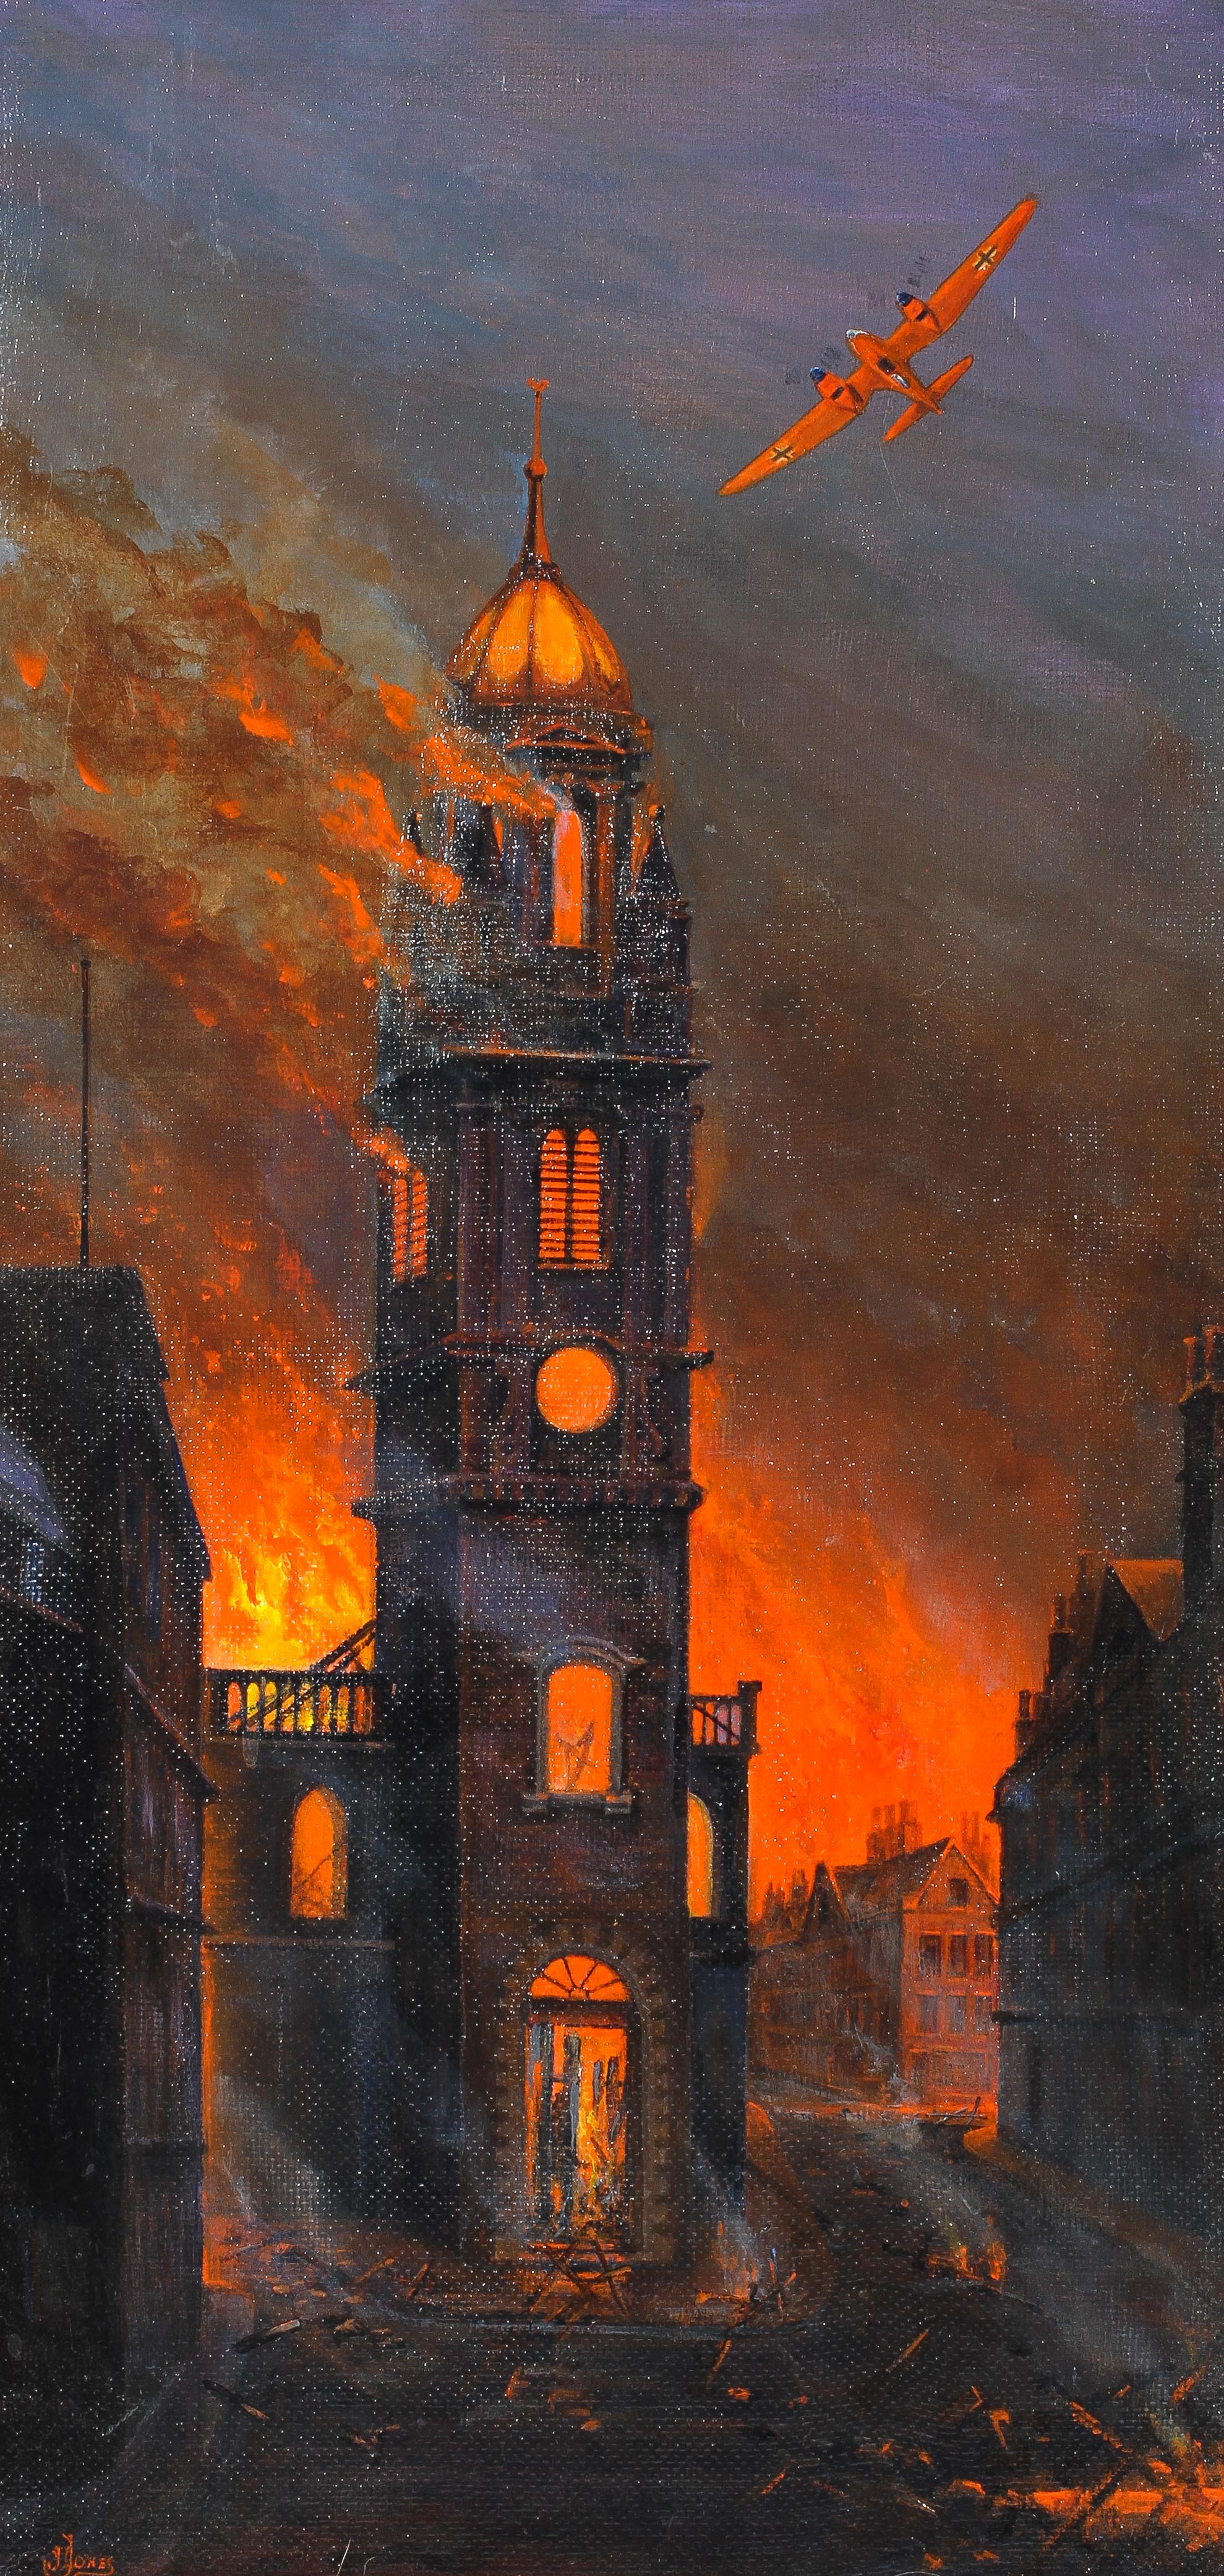 Two Acrylic on board paintings of the Bath Blitz April 1942 depicting St James Church Henry Street - Image 6 of 9